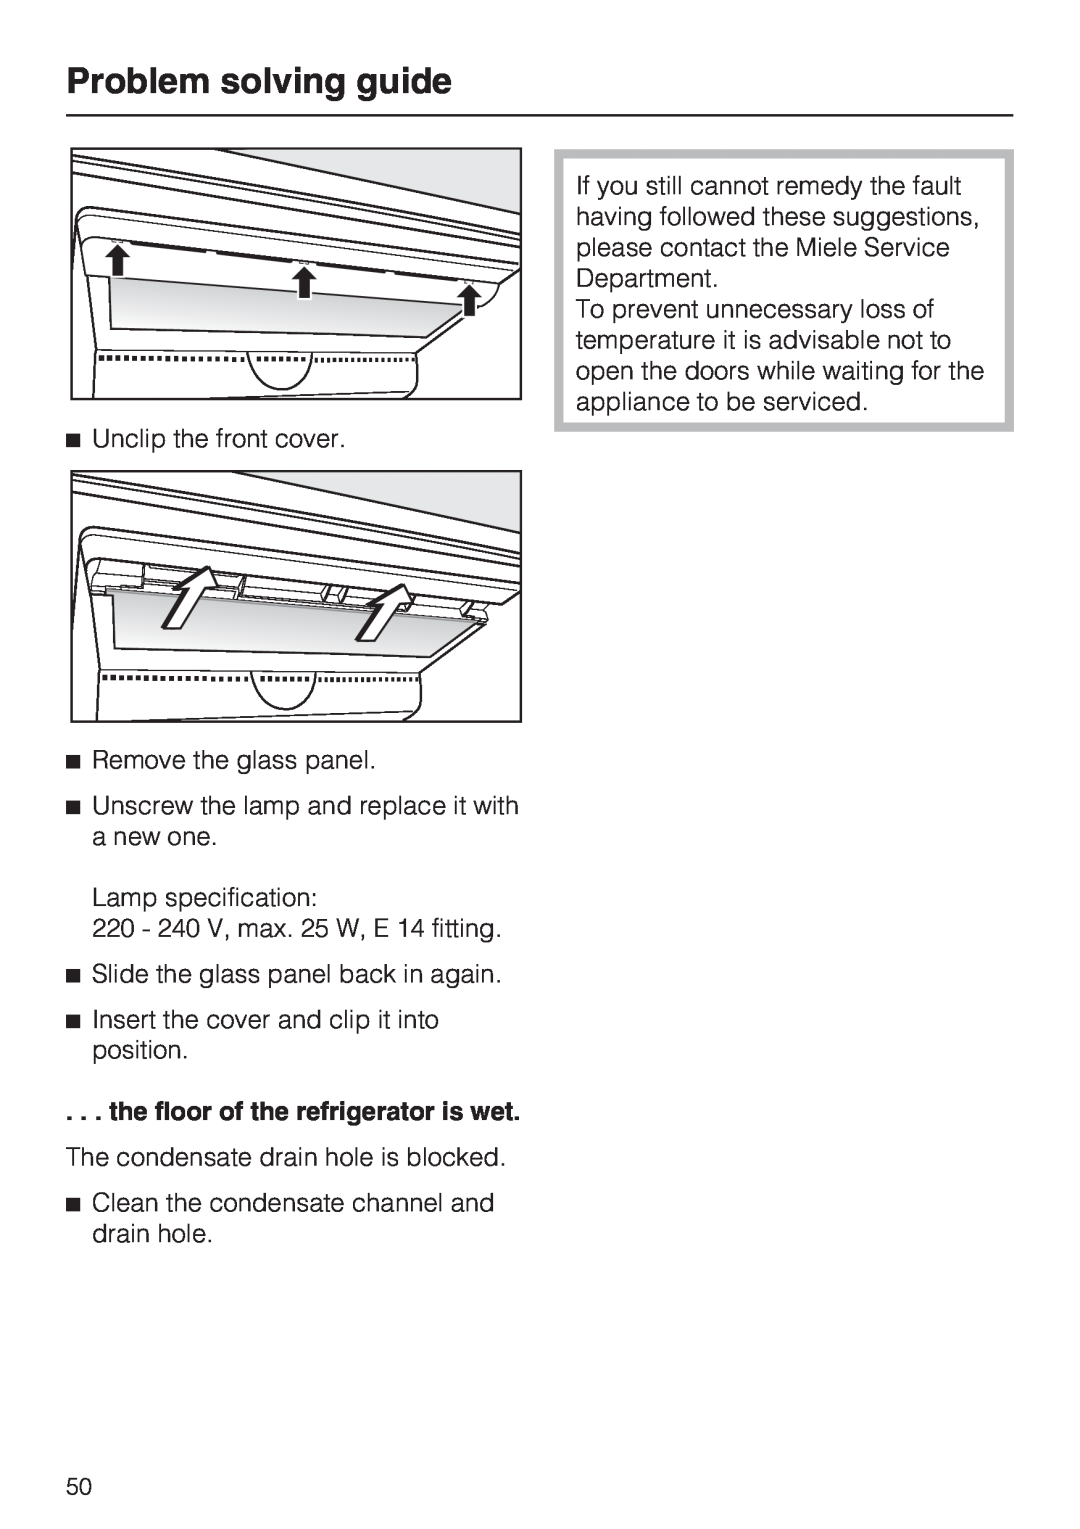 Miele KFN 14947 SDE ED installation instructions the floor of the refrigerator is wet, Problem solving guide 